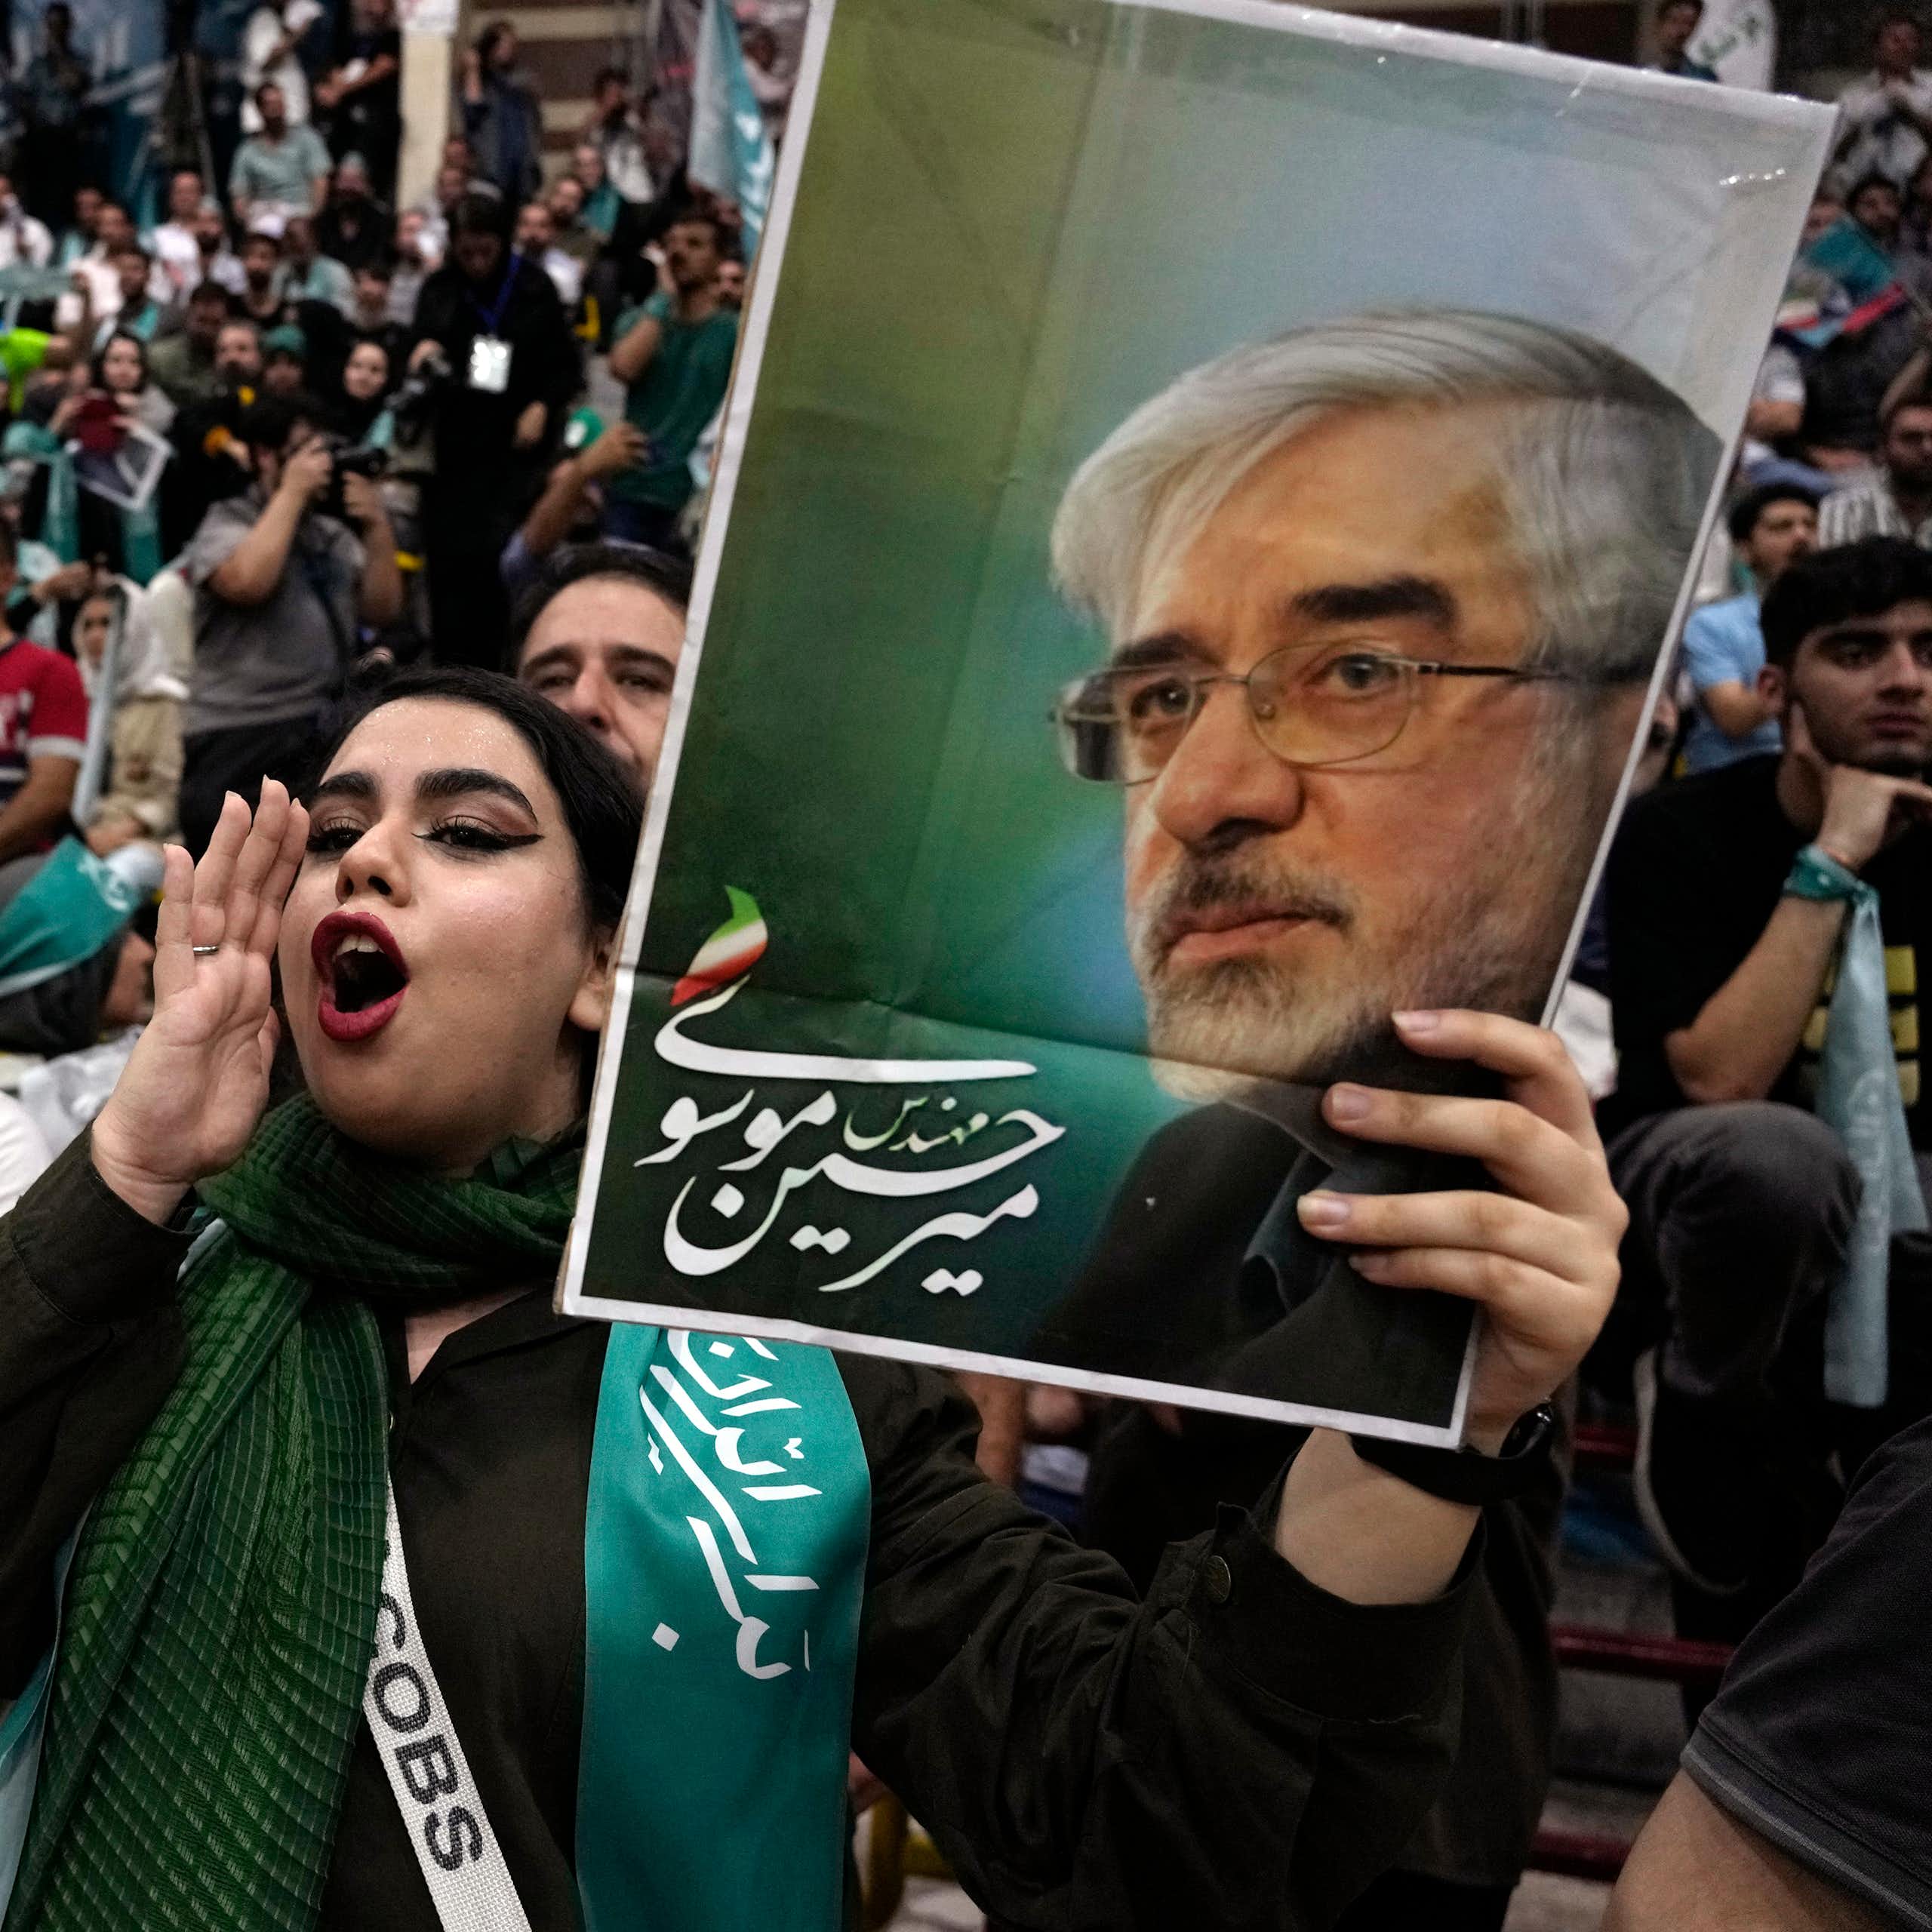 A large crowd of Iranian supporters of Masoud Pezeshkian gather in Tehran; in the foreground, a young woman shouts her endorsement while holding up a campaign sign.